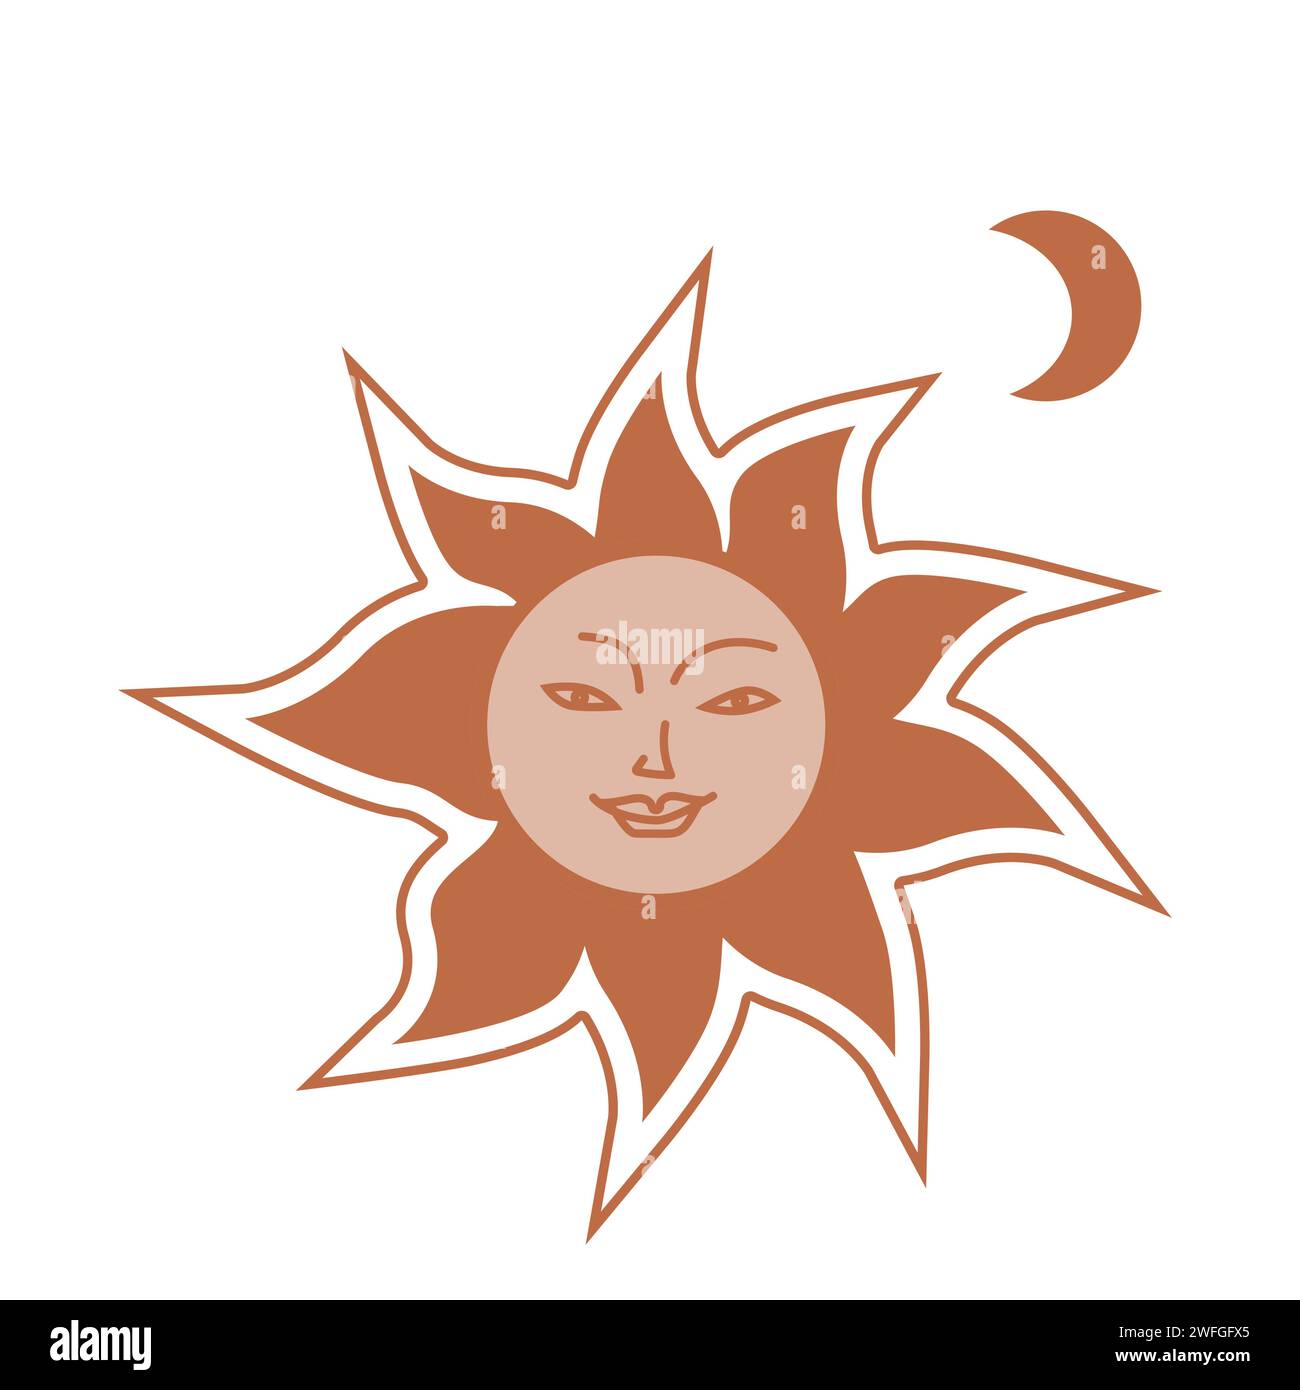 Hand drawn western sun and moon boho elements. Vector illustration in brown colors. Cute mystic sun with face icon. Can used for decoration, card, poster.  Stock Vector